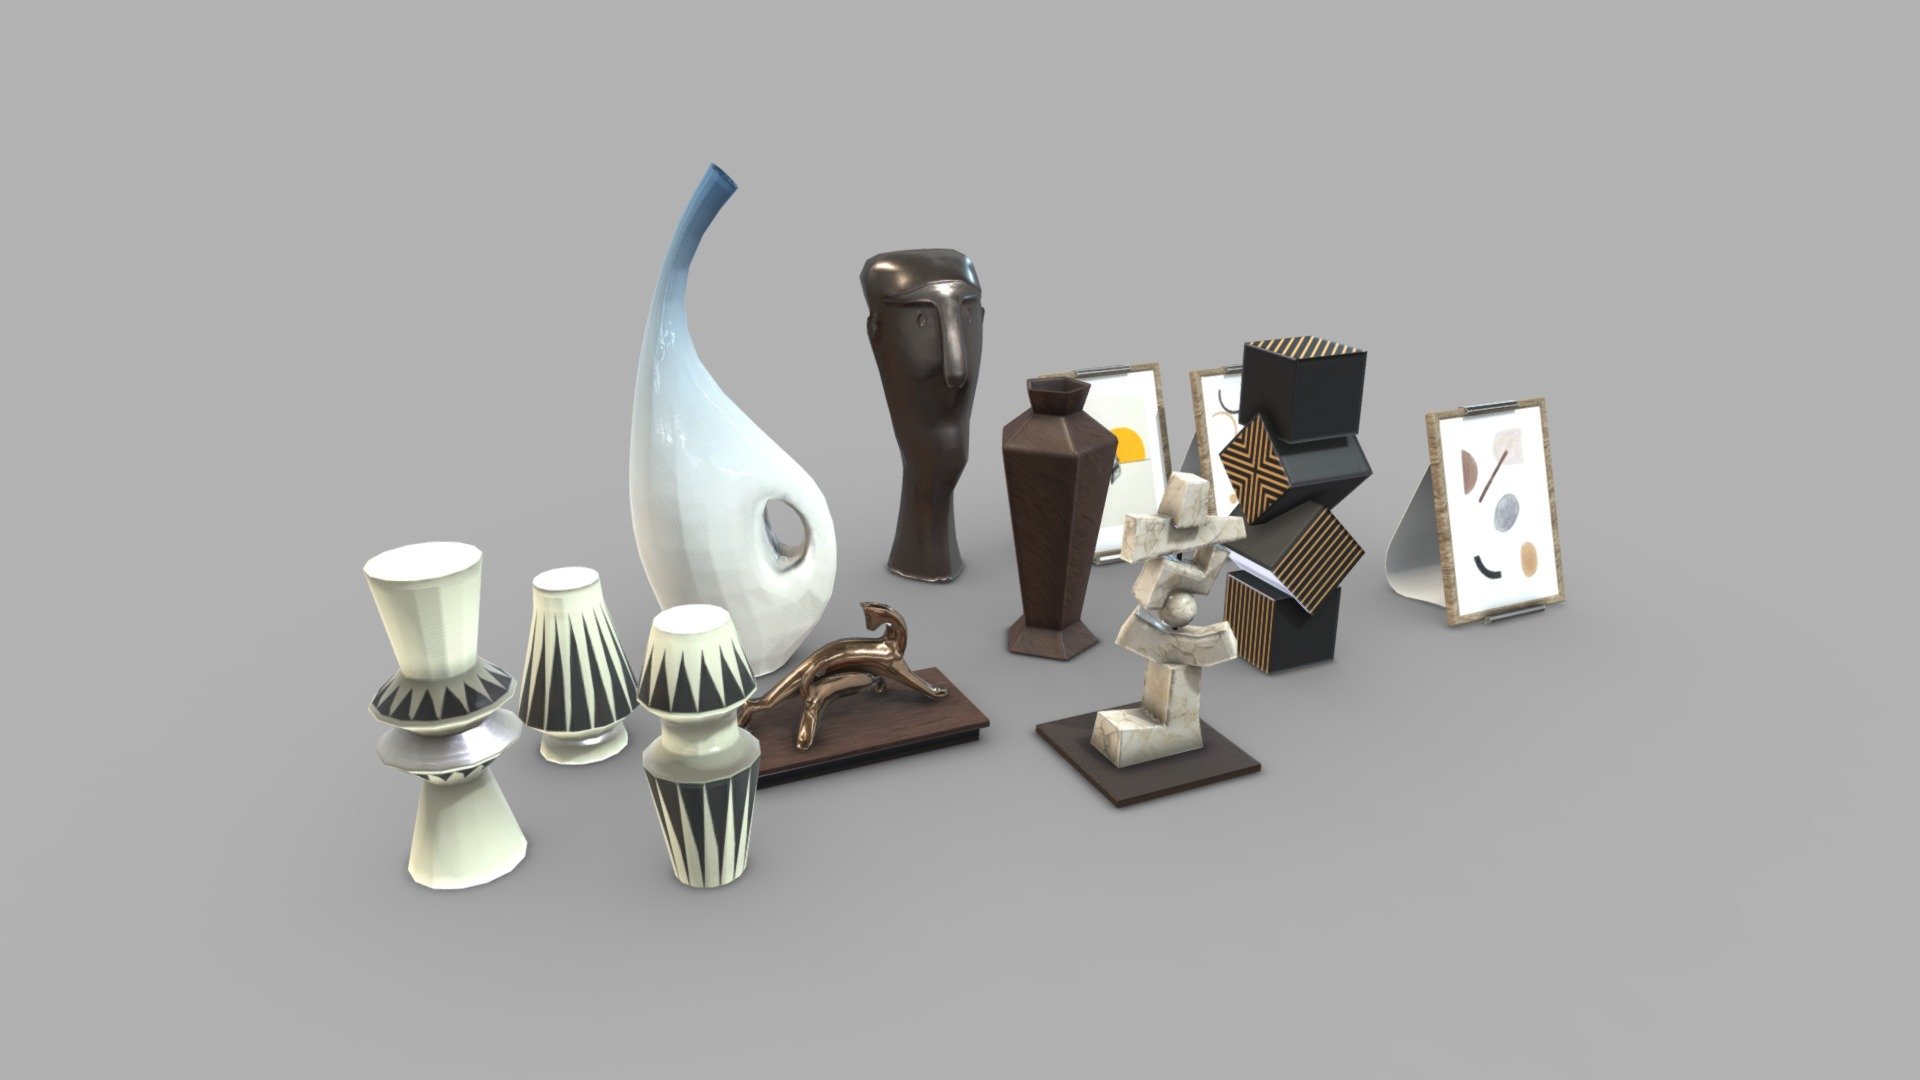 Interior Decoration Object Vase Sculpture Photo Set:


12 objects
Lowpoly, about 500 tris &amp; 250 verts for each model, clean mesh, UV non-overlapping, optimized for games, apps, VR, AR
Realistic PBR texture: Color, Normal, Height, Roughness, Metallic, AO
File format support: FBX, OBj, Maya (native), FBX with material ready for game engine: Unity, UE4
 - Interior Decorations - Buy Royalty Free 3D model by Dzung Dinh (@hugechimera) 3d model